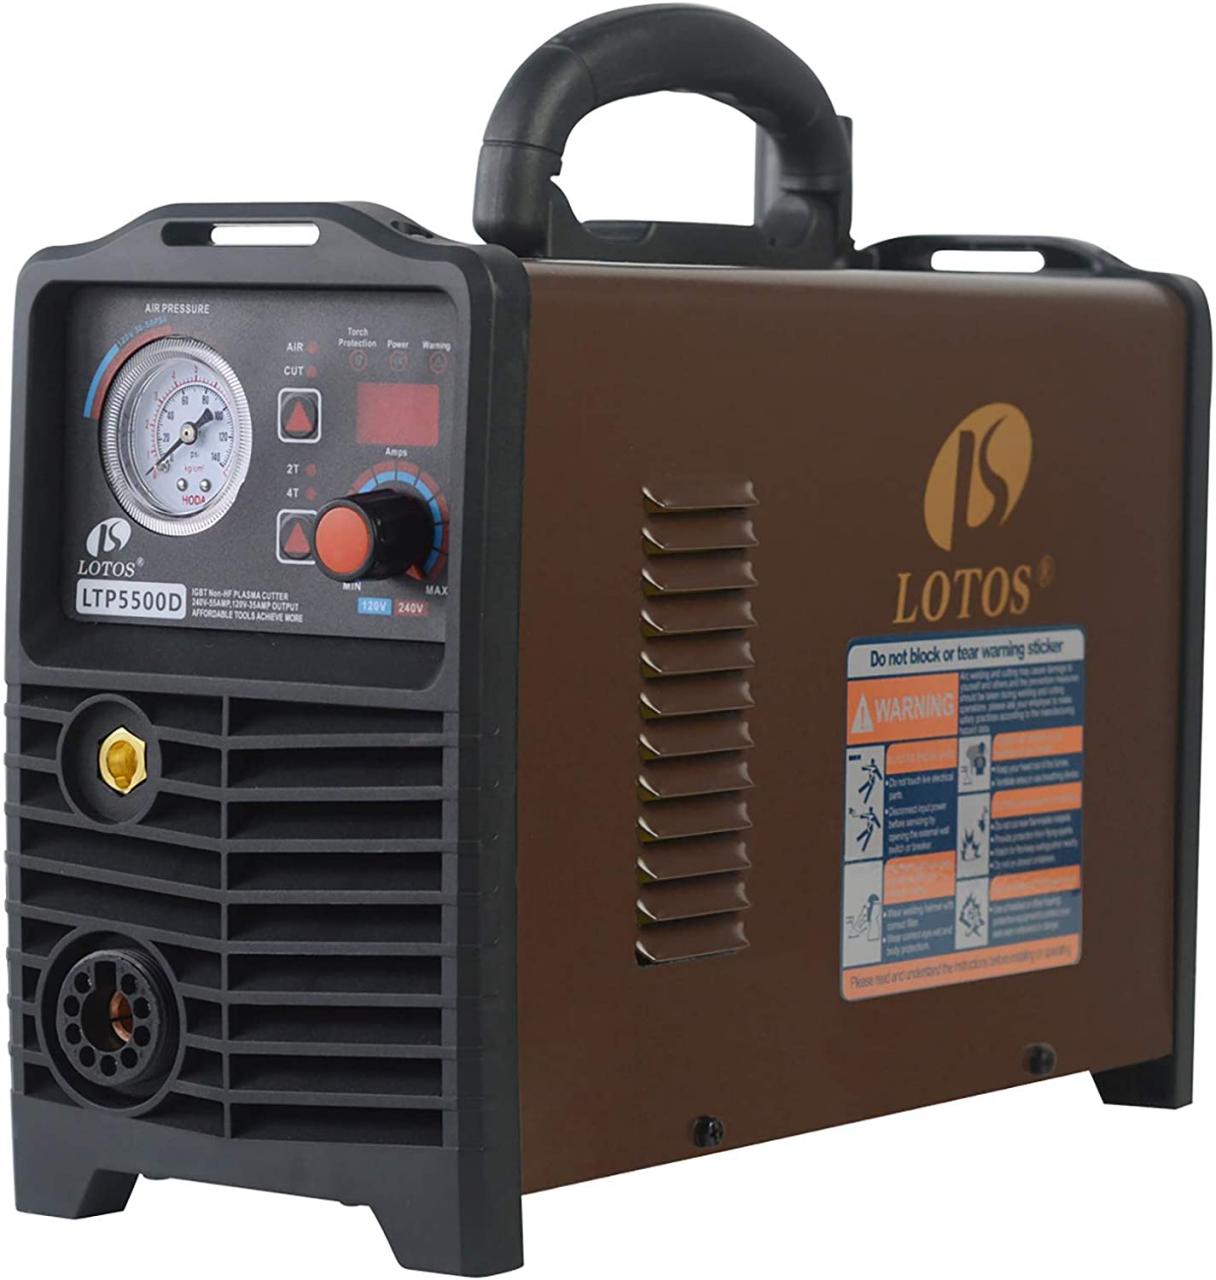 Buy Lotos Non-Touch Pilot Arc CNC Enabled Plasma Cutter, Digital Control,  THC Torch Height Control, Dual Voltage 110V/220V, 3/5 inch Clean Cut, Brown  (55AMP CNC) Online in Vietnam. B07QXVNQV2